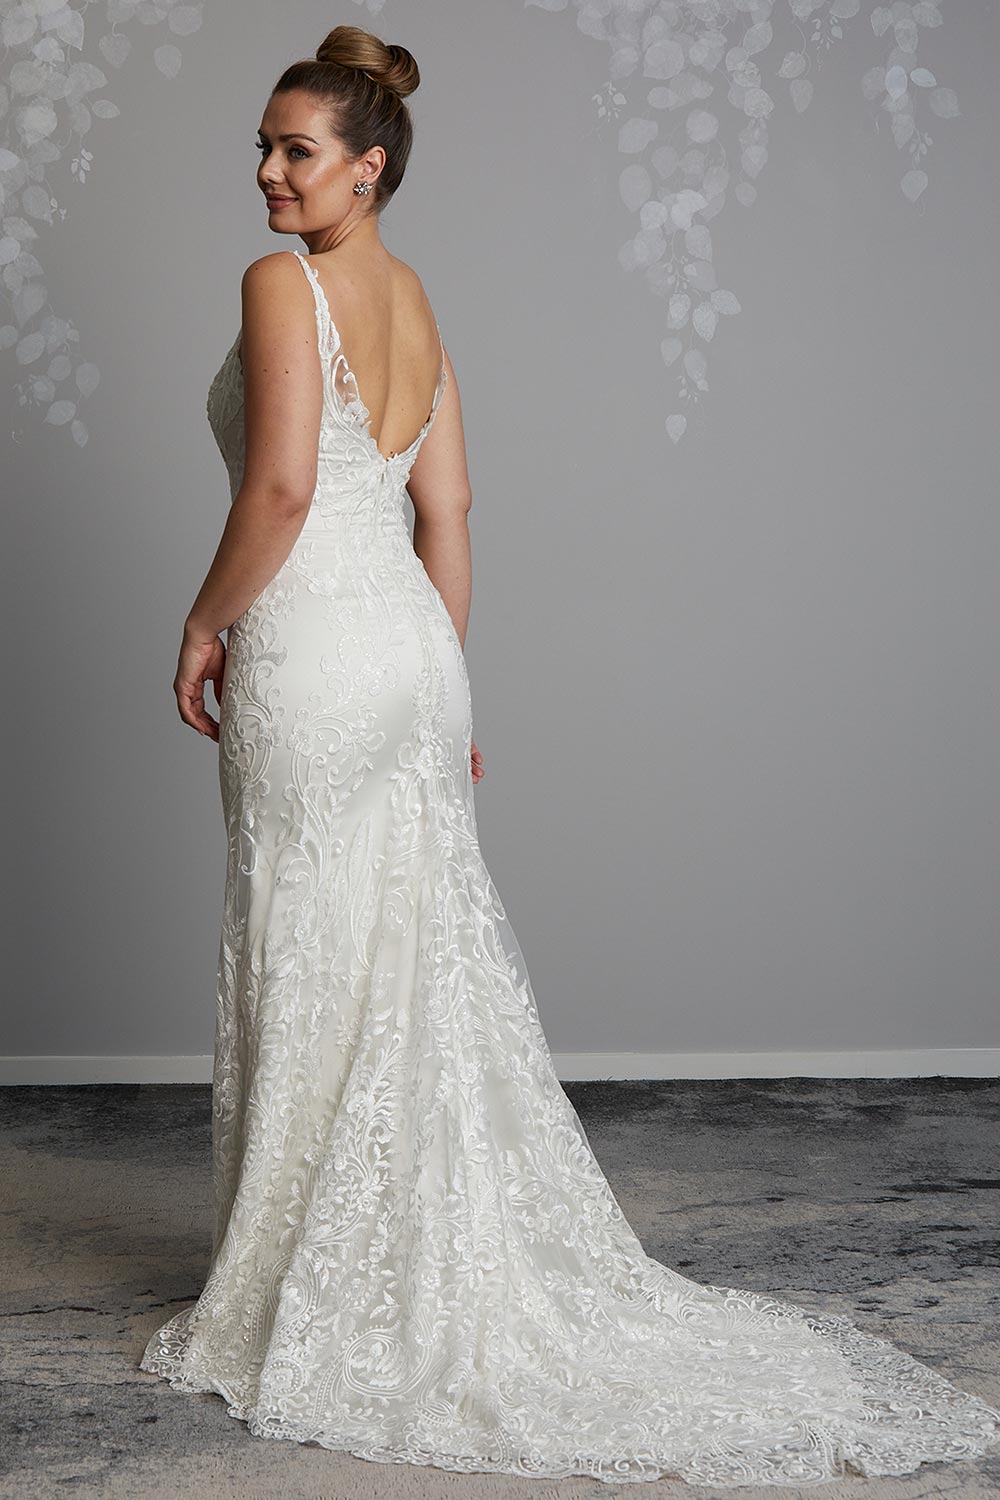 Sahara Wedding Dress from Vinka Design. Stunning fitted lace wedding gown. Lightly-beaded floral lace highlights the ivory stretch satin base. Sweetheart neckline & low back with beautiful lace detail. Full length view of the low scoop back of the dress with long lace train.